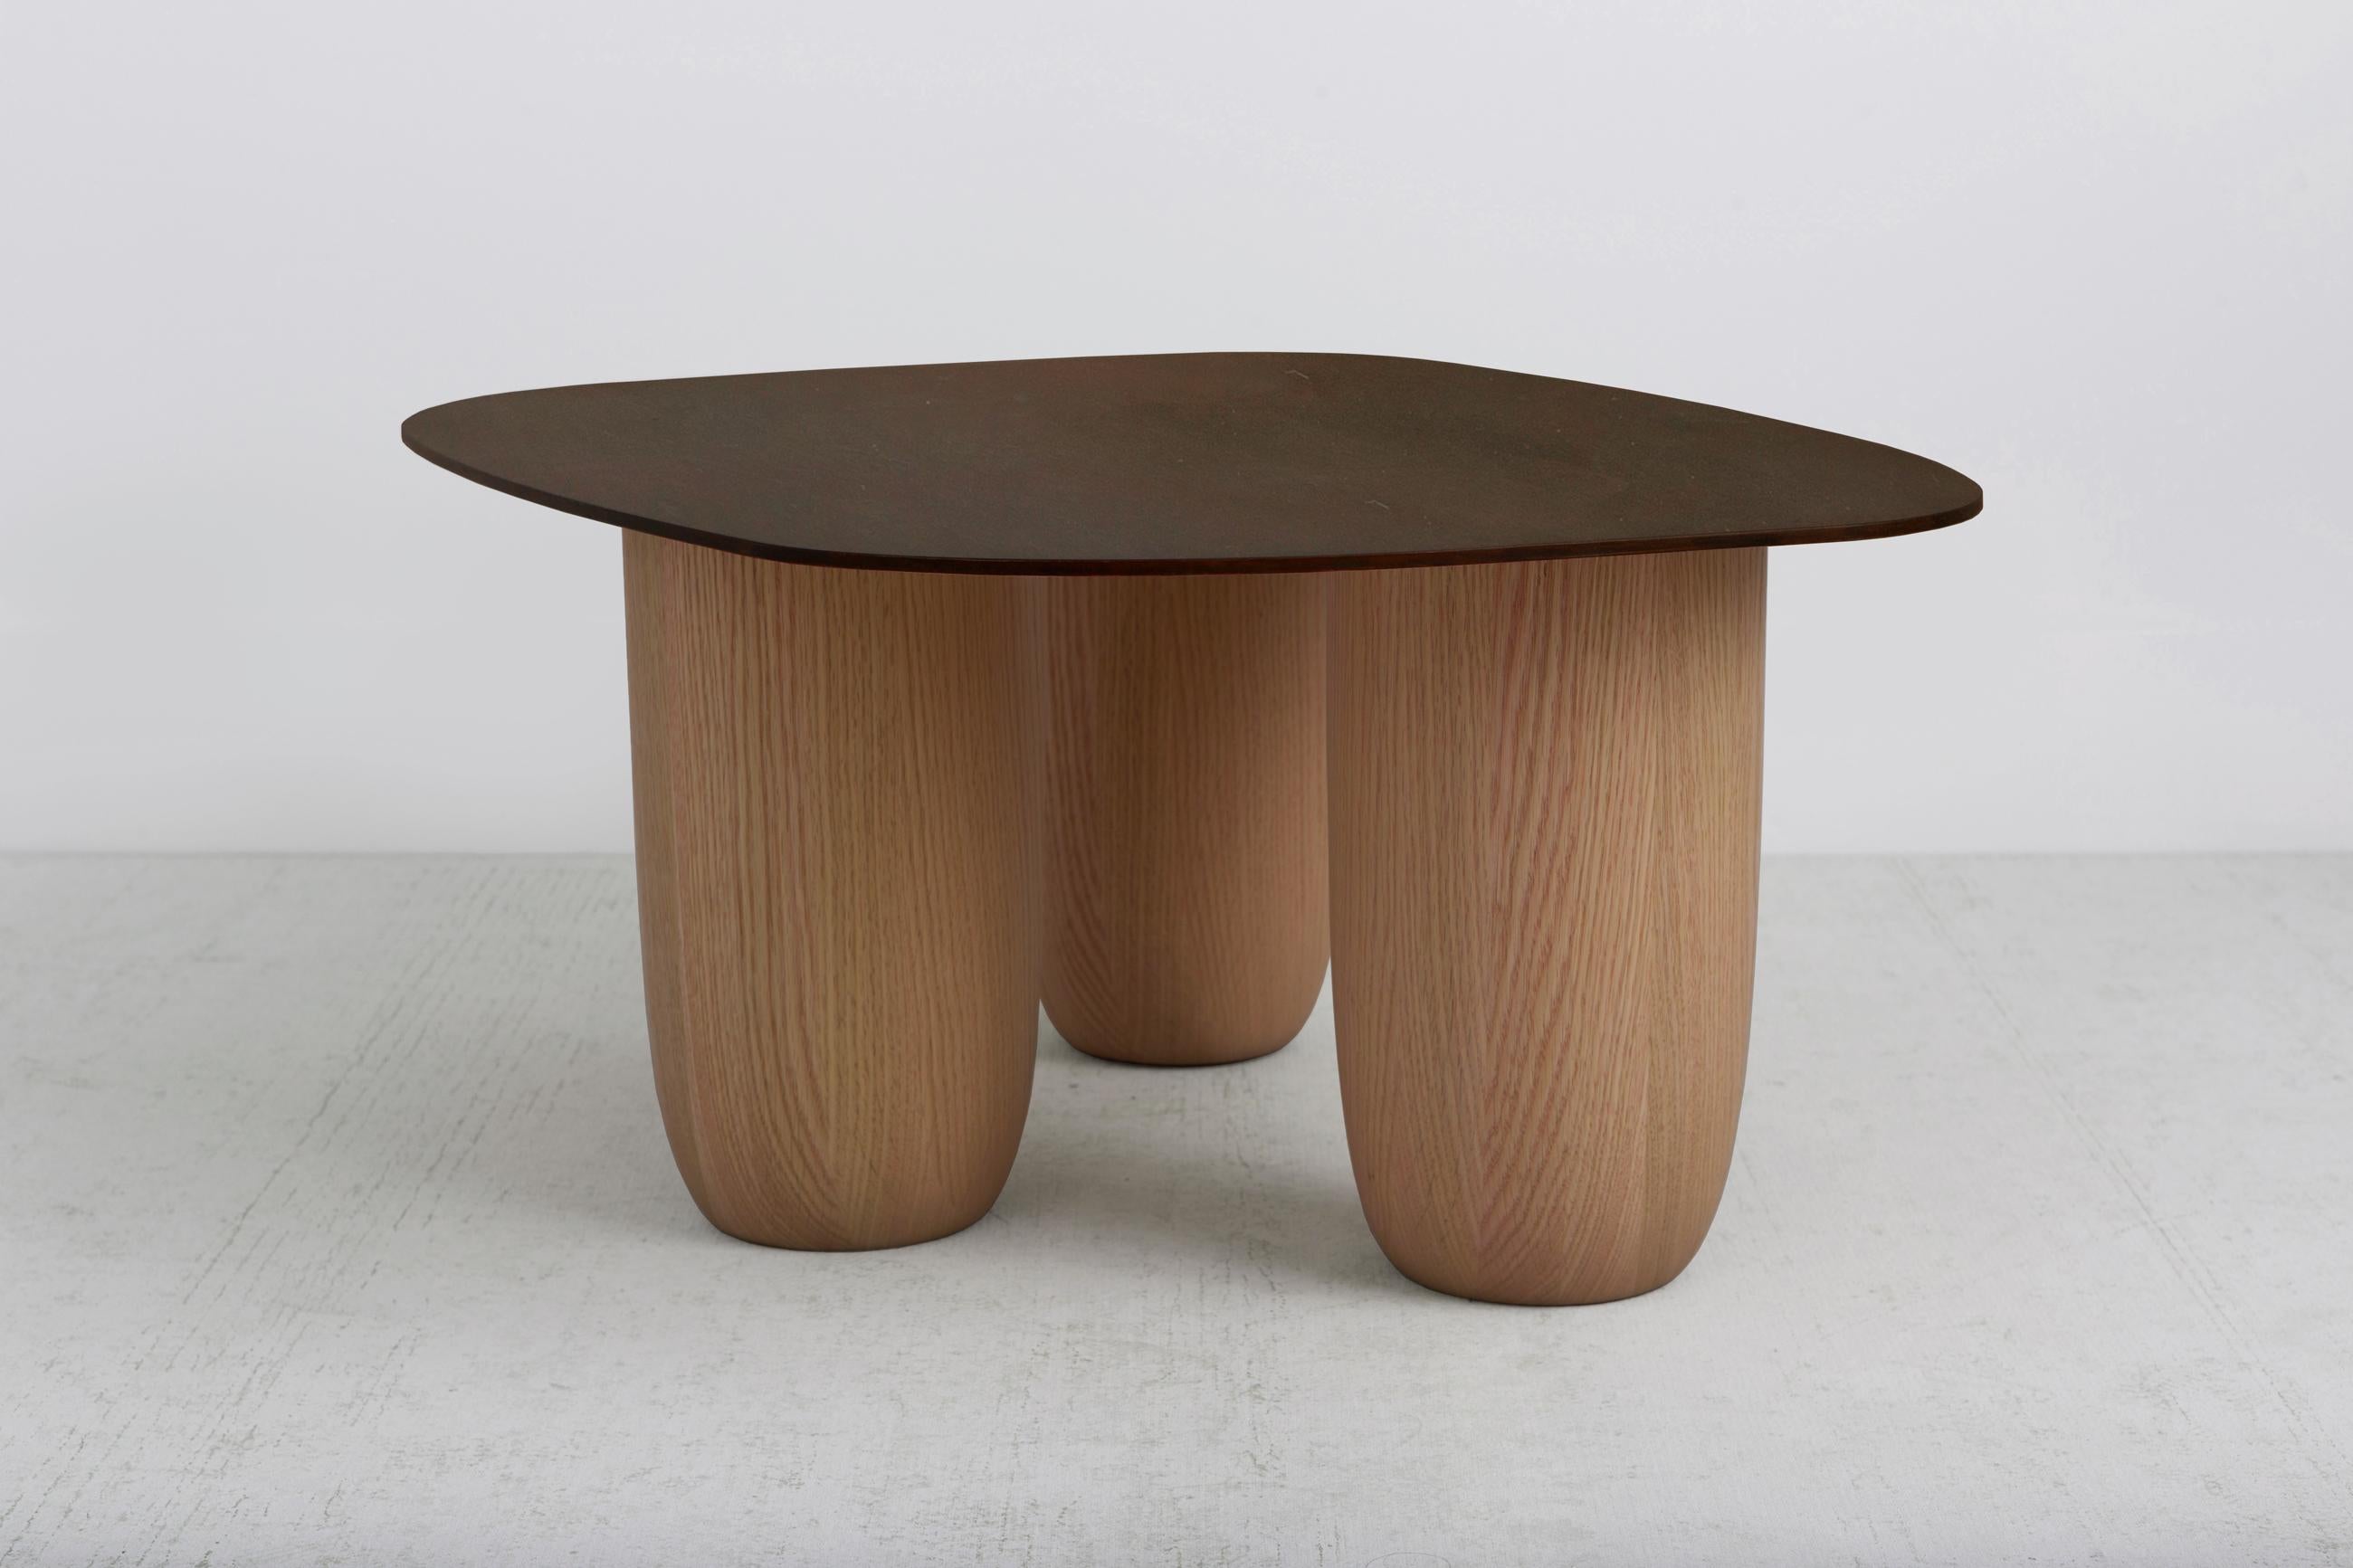 Minimalist Low Tables Japanese Brown Patina Steel with Oak Legs Vivian Carbonell For Sale 1